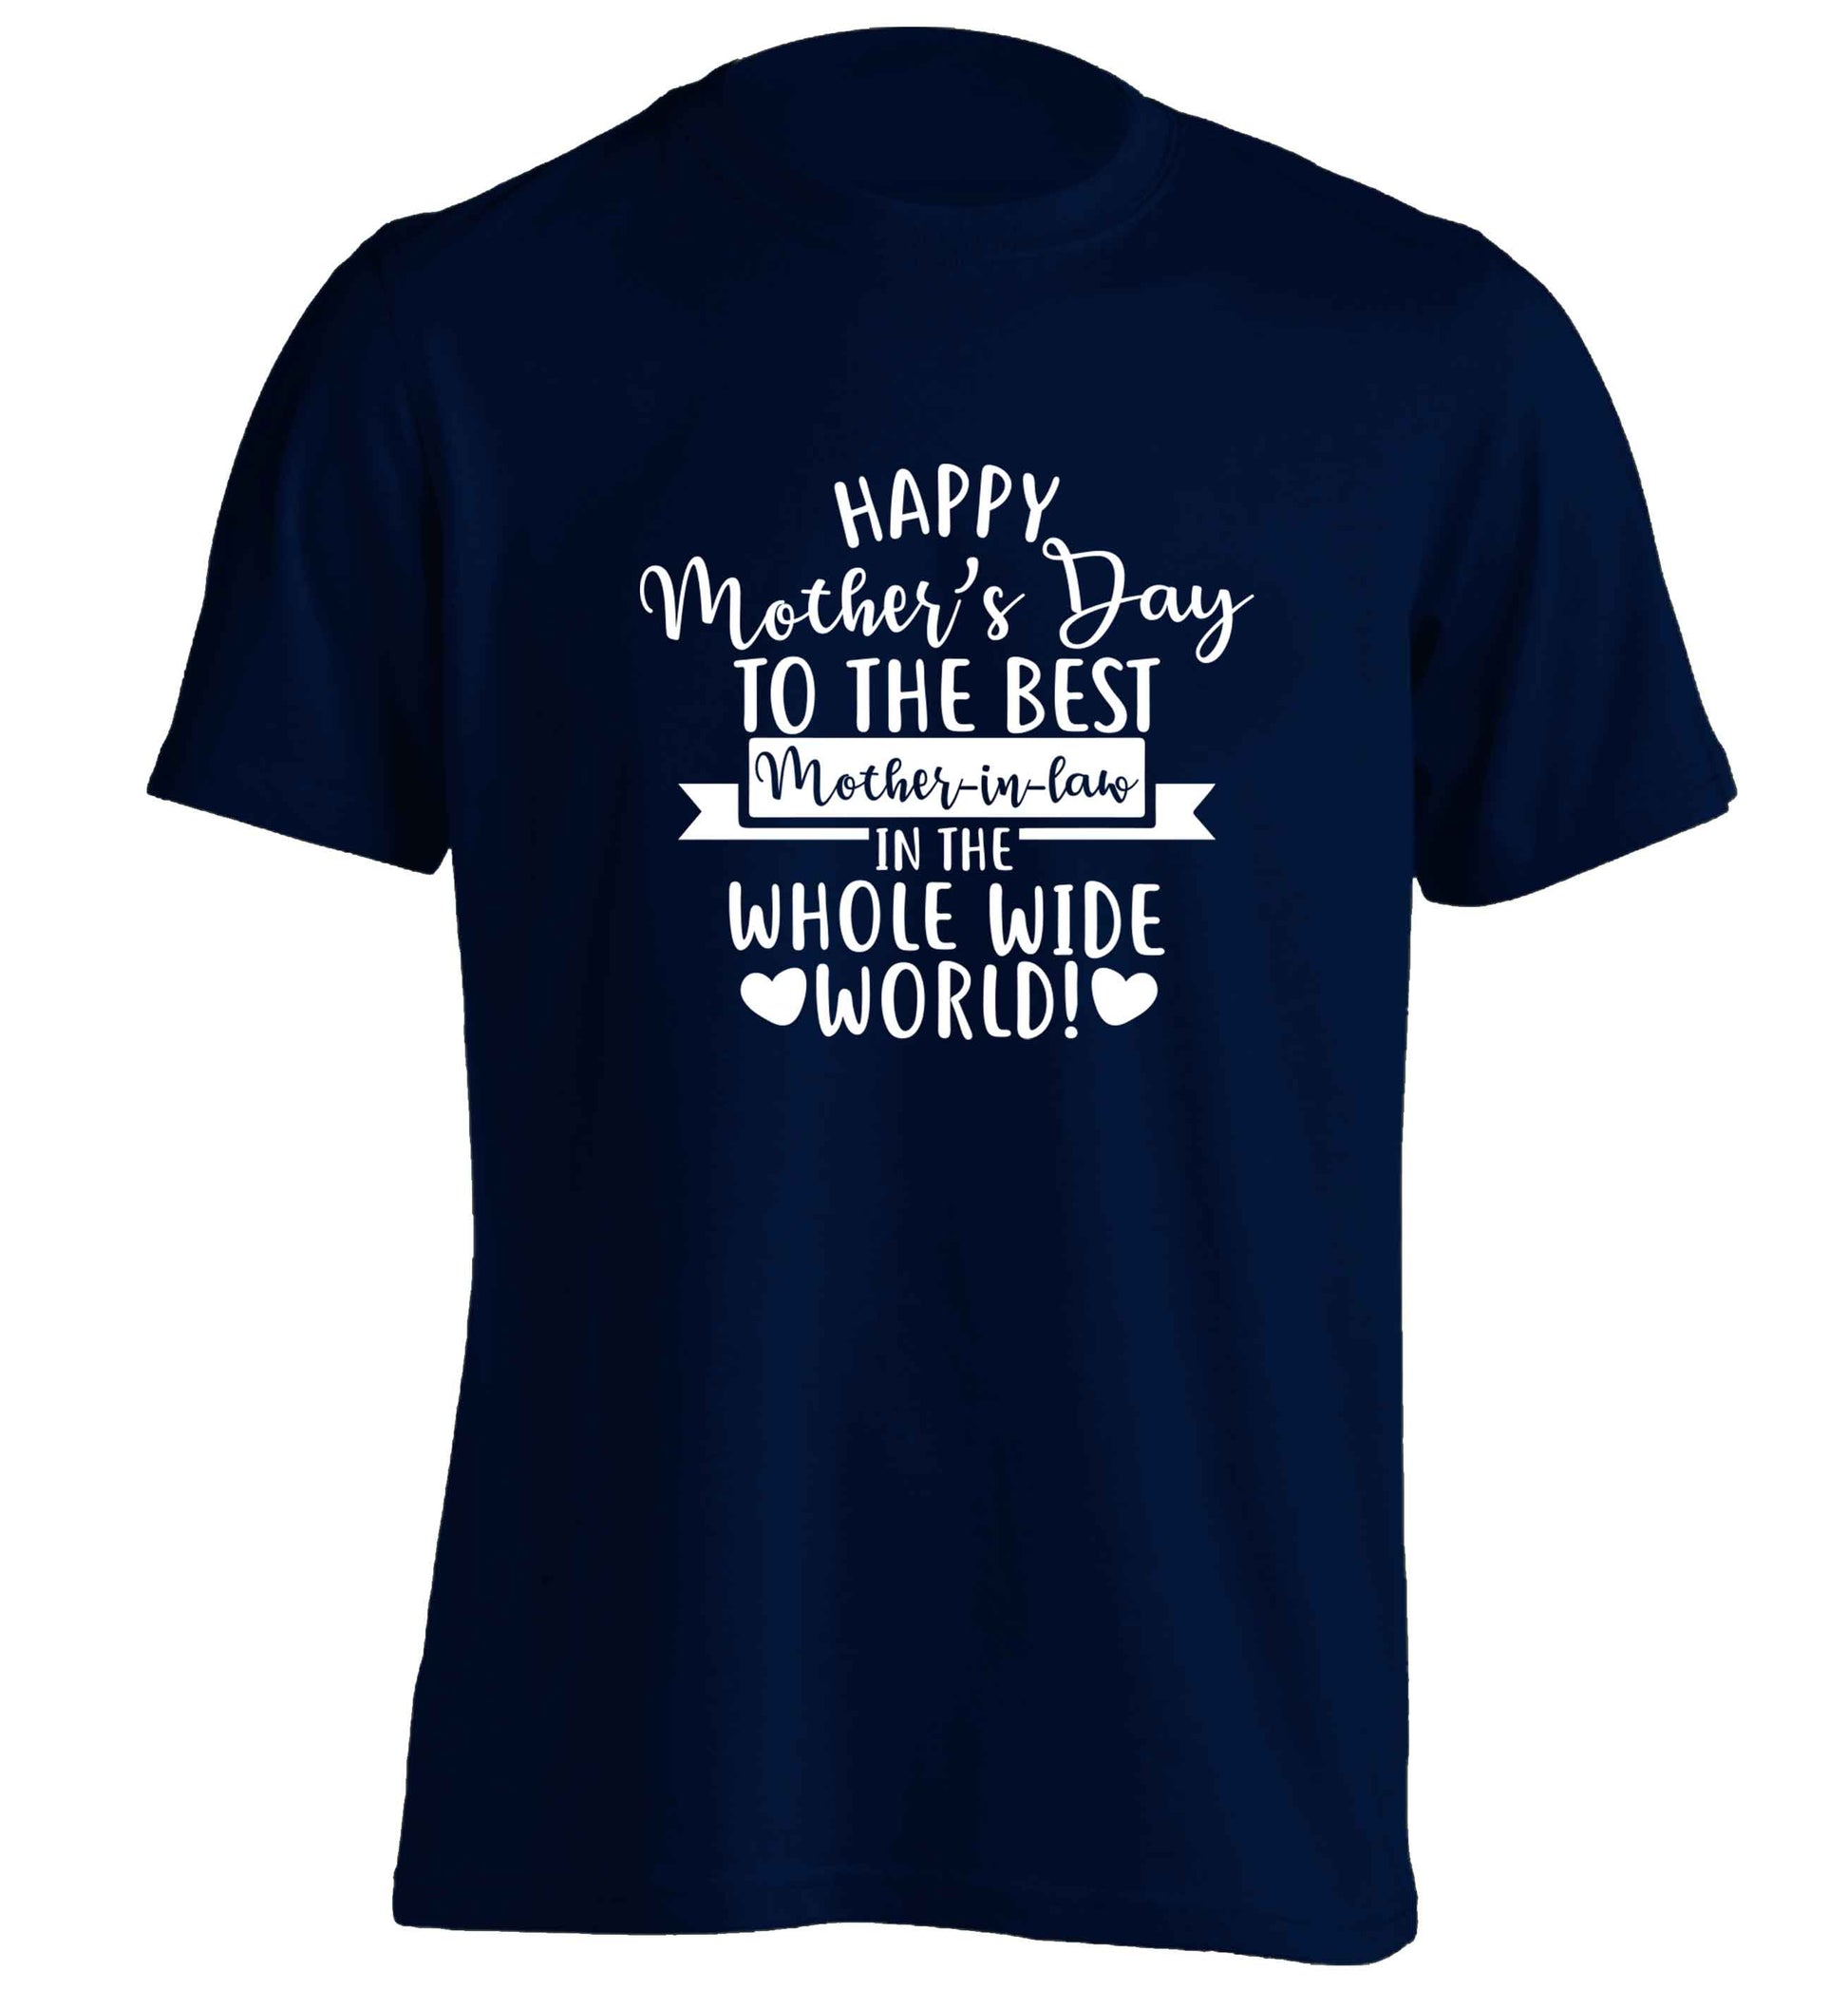 Happy mother's day to the best mother-in law in the world adults unisex navy Tshirt 2XL